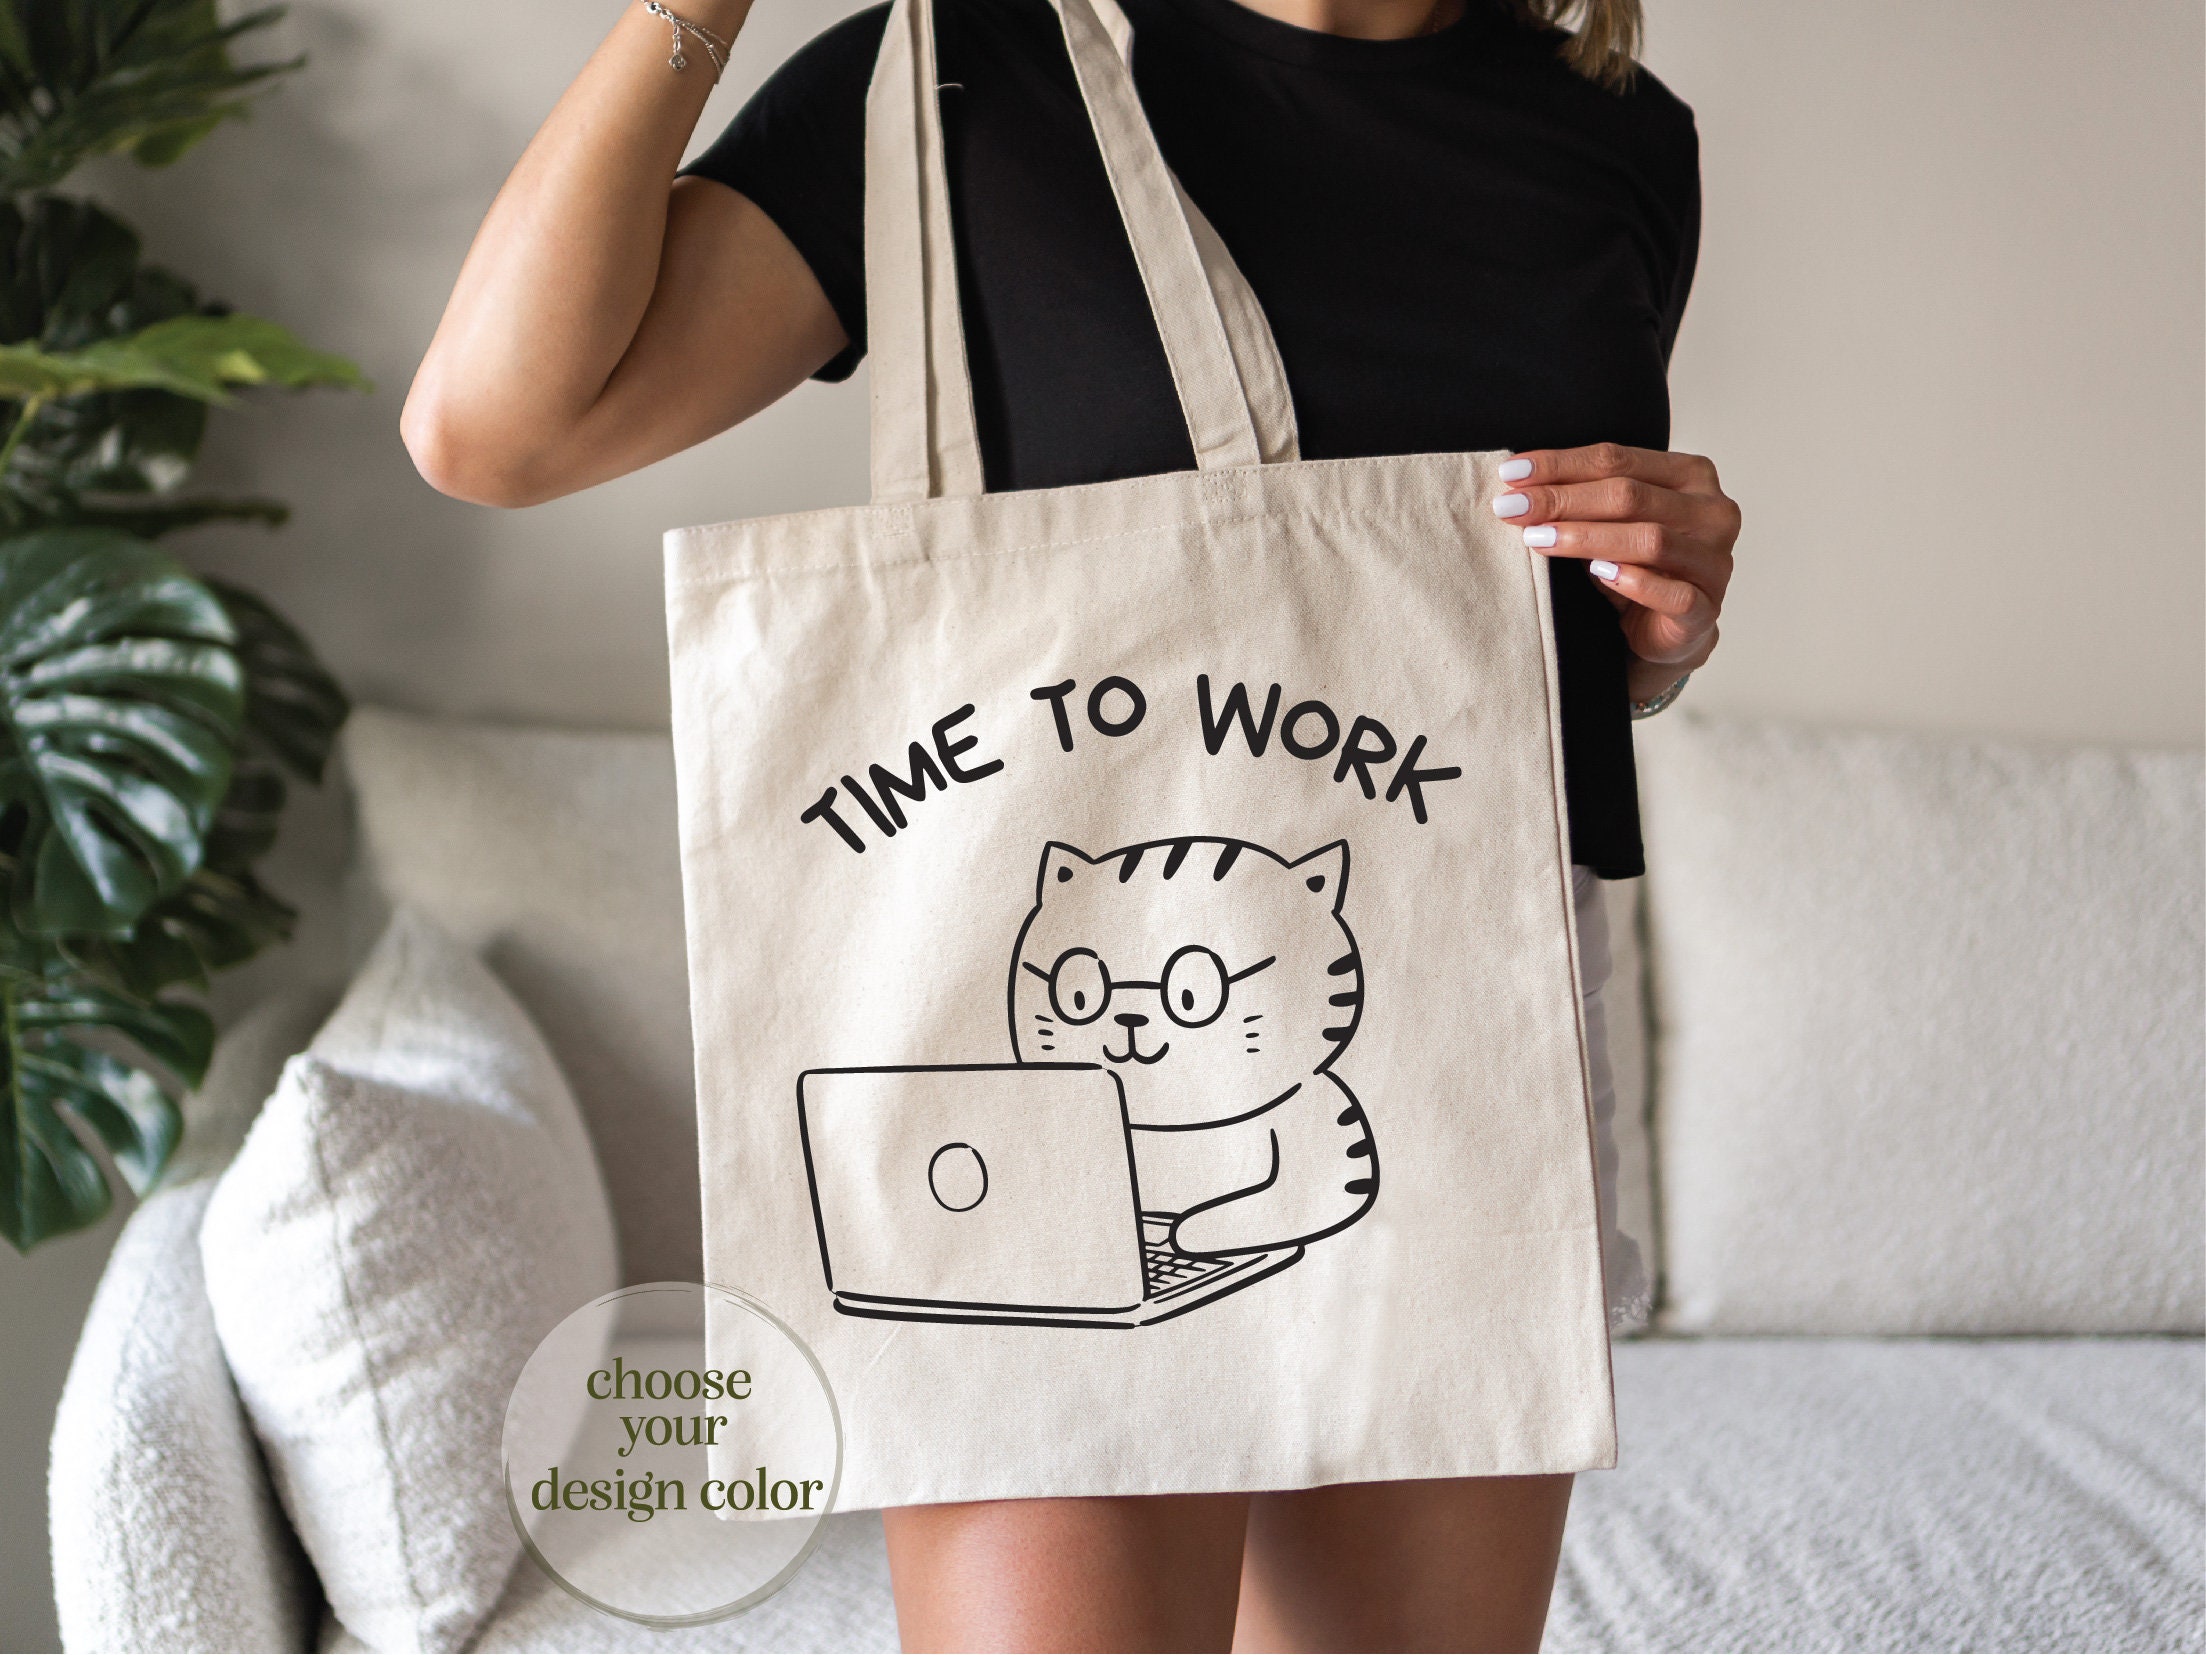 professional stylish tote bags for work